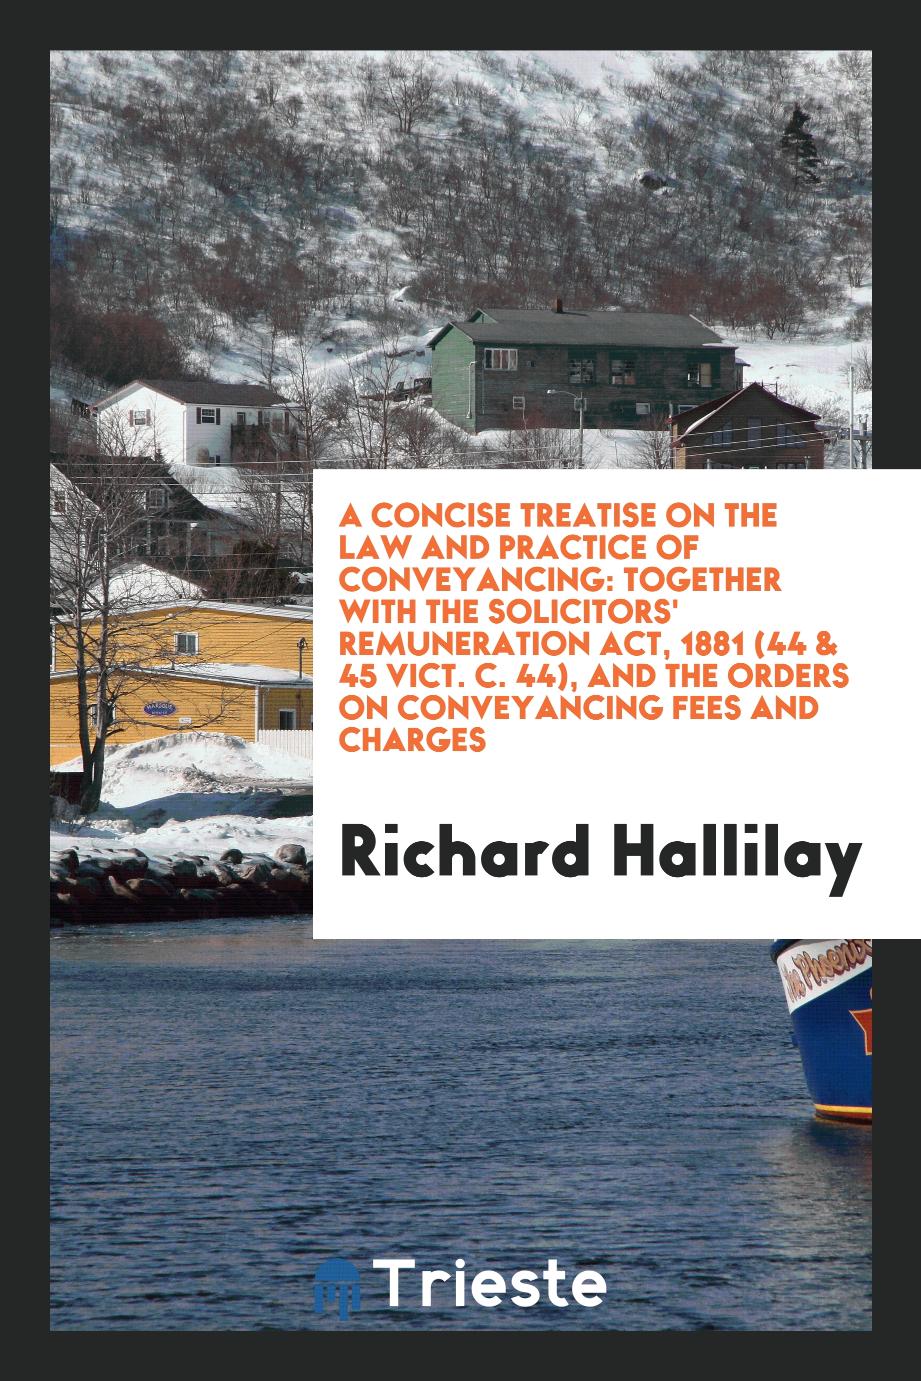 A Concise Treatise on the Law and Practice of Conveyancing: Together with The Solicitors' Remuneration Act, 1881 (44 & 45 Vict. C. 44), and the Orders on Conveyancing Fees and Charges